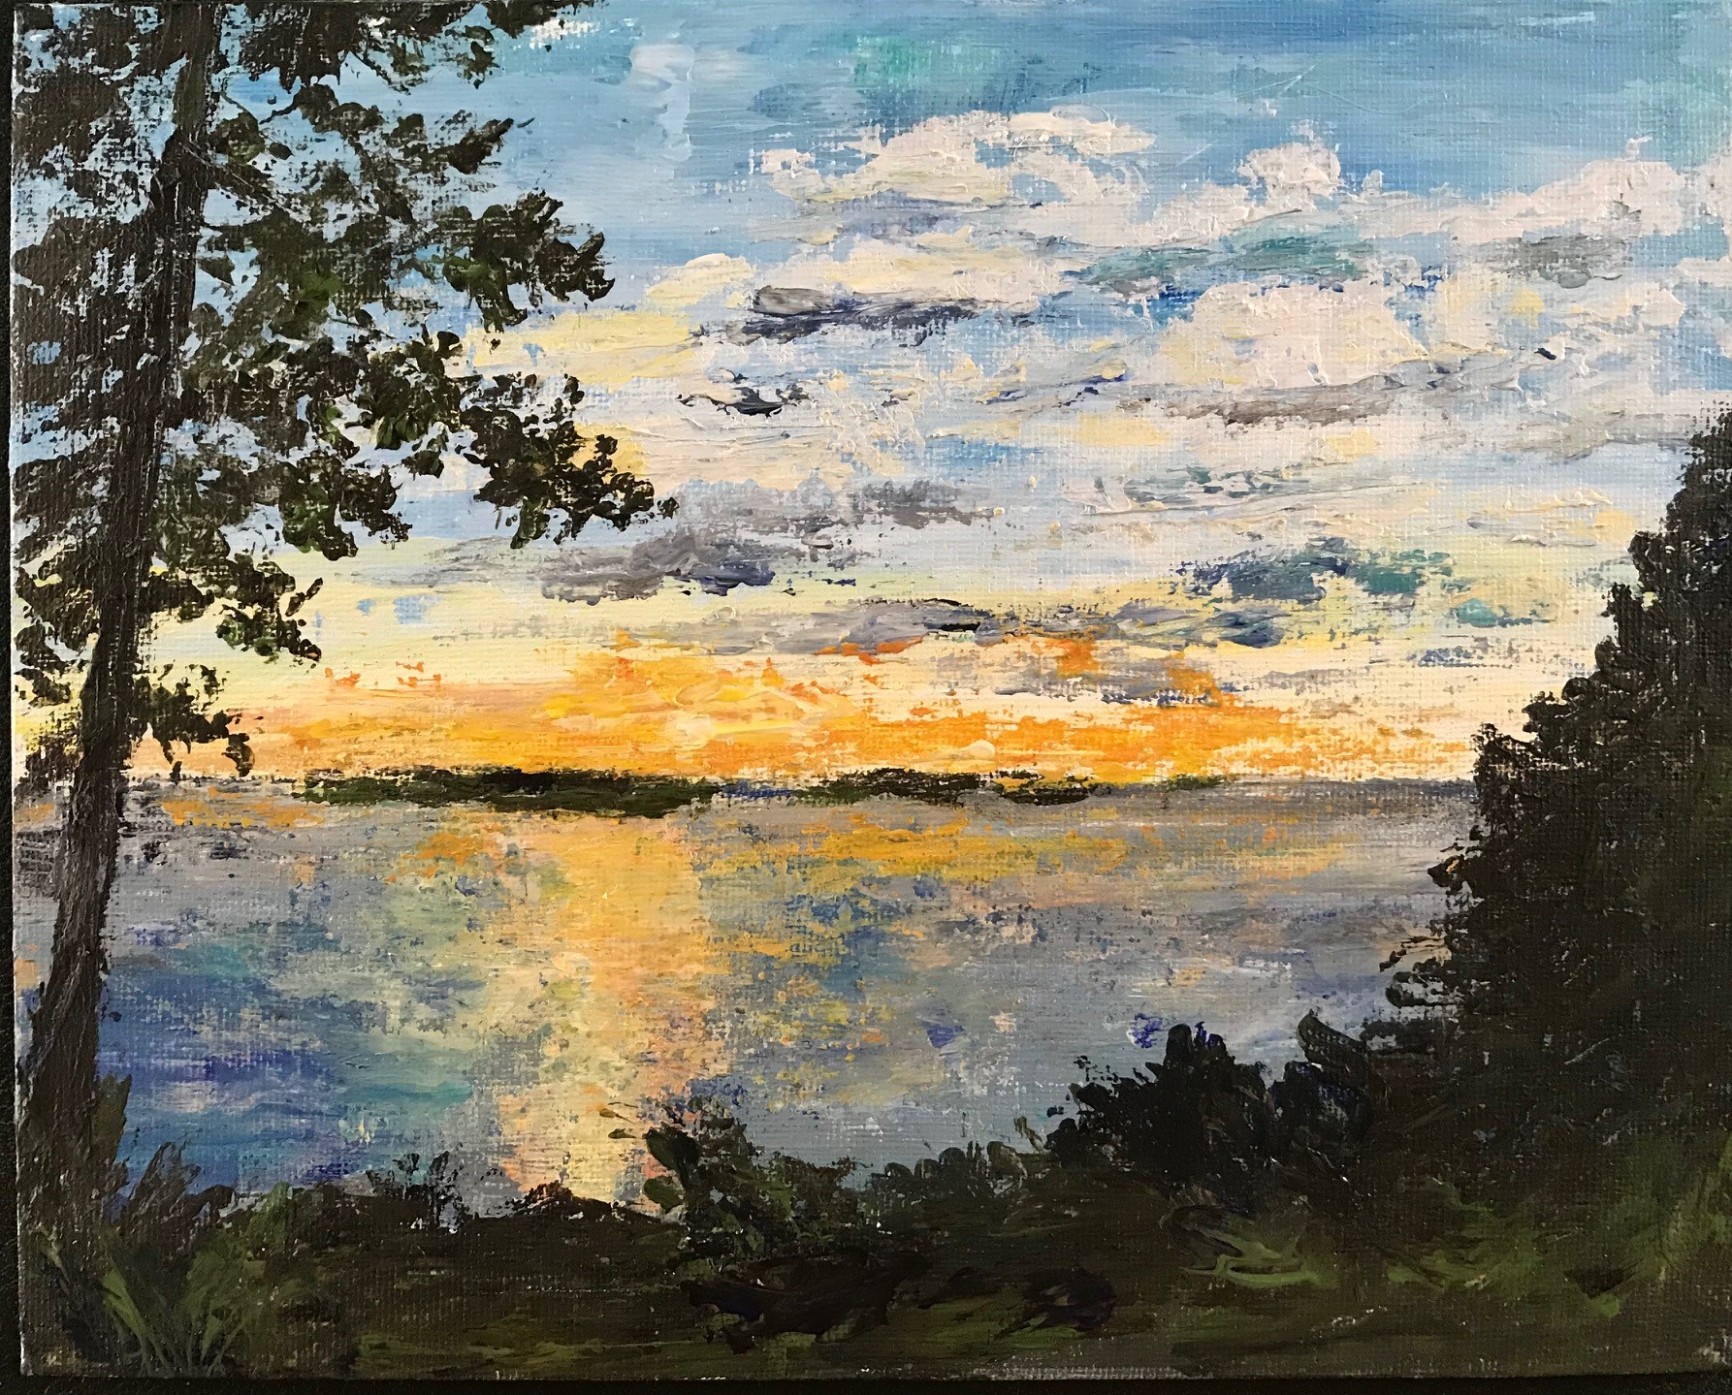 Sun Setting Over Islands Palette Knife Painting Early Bird $8 Off ..